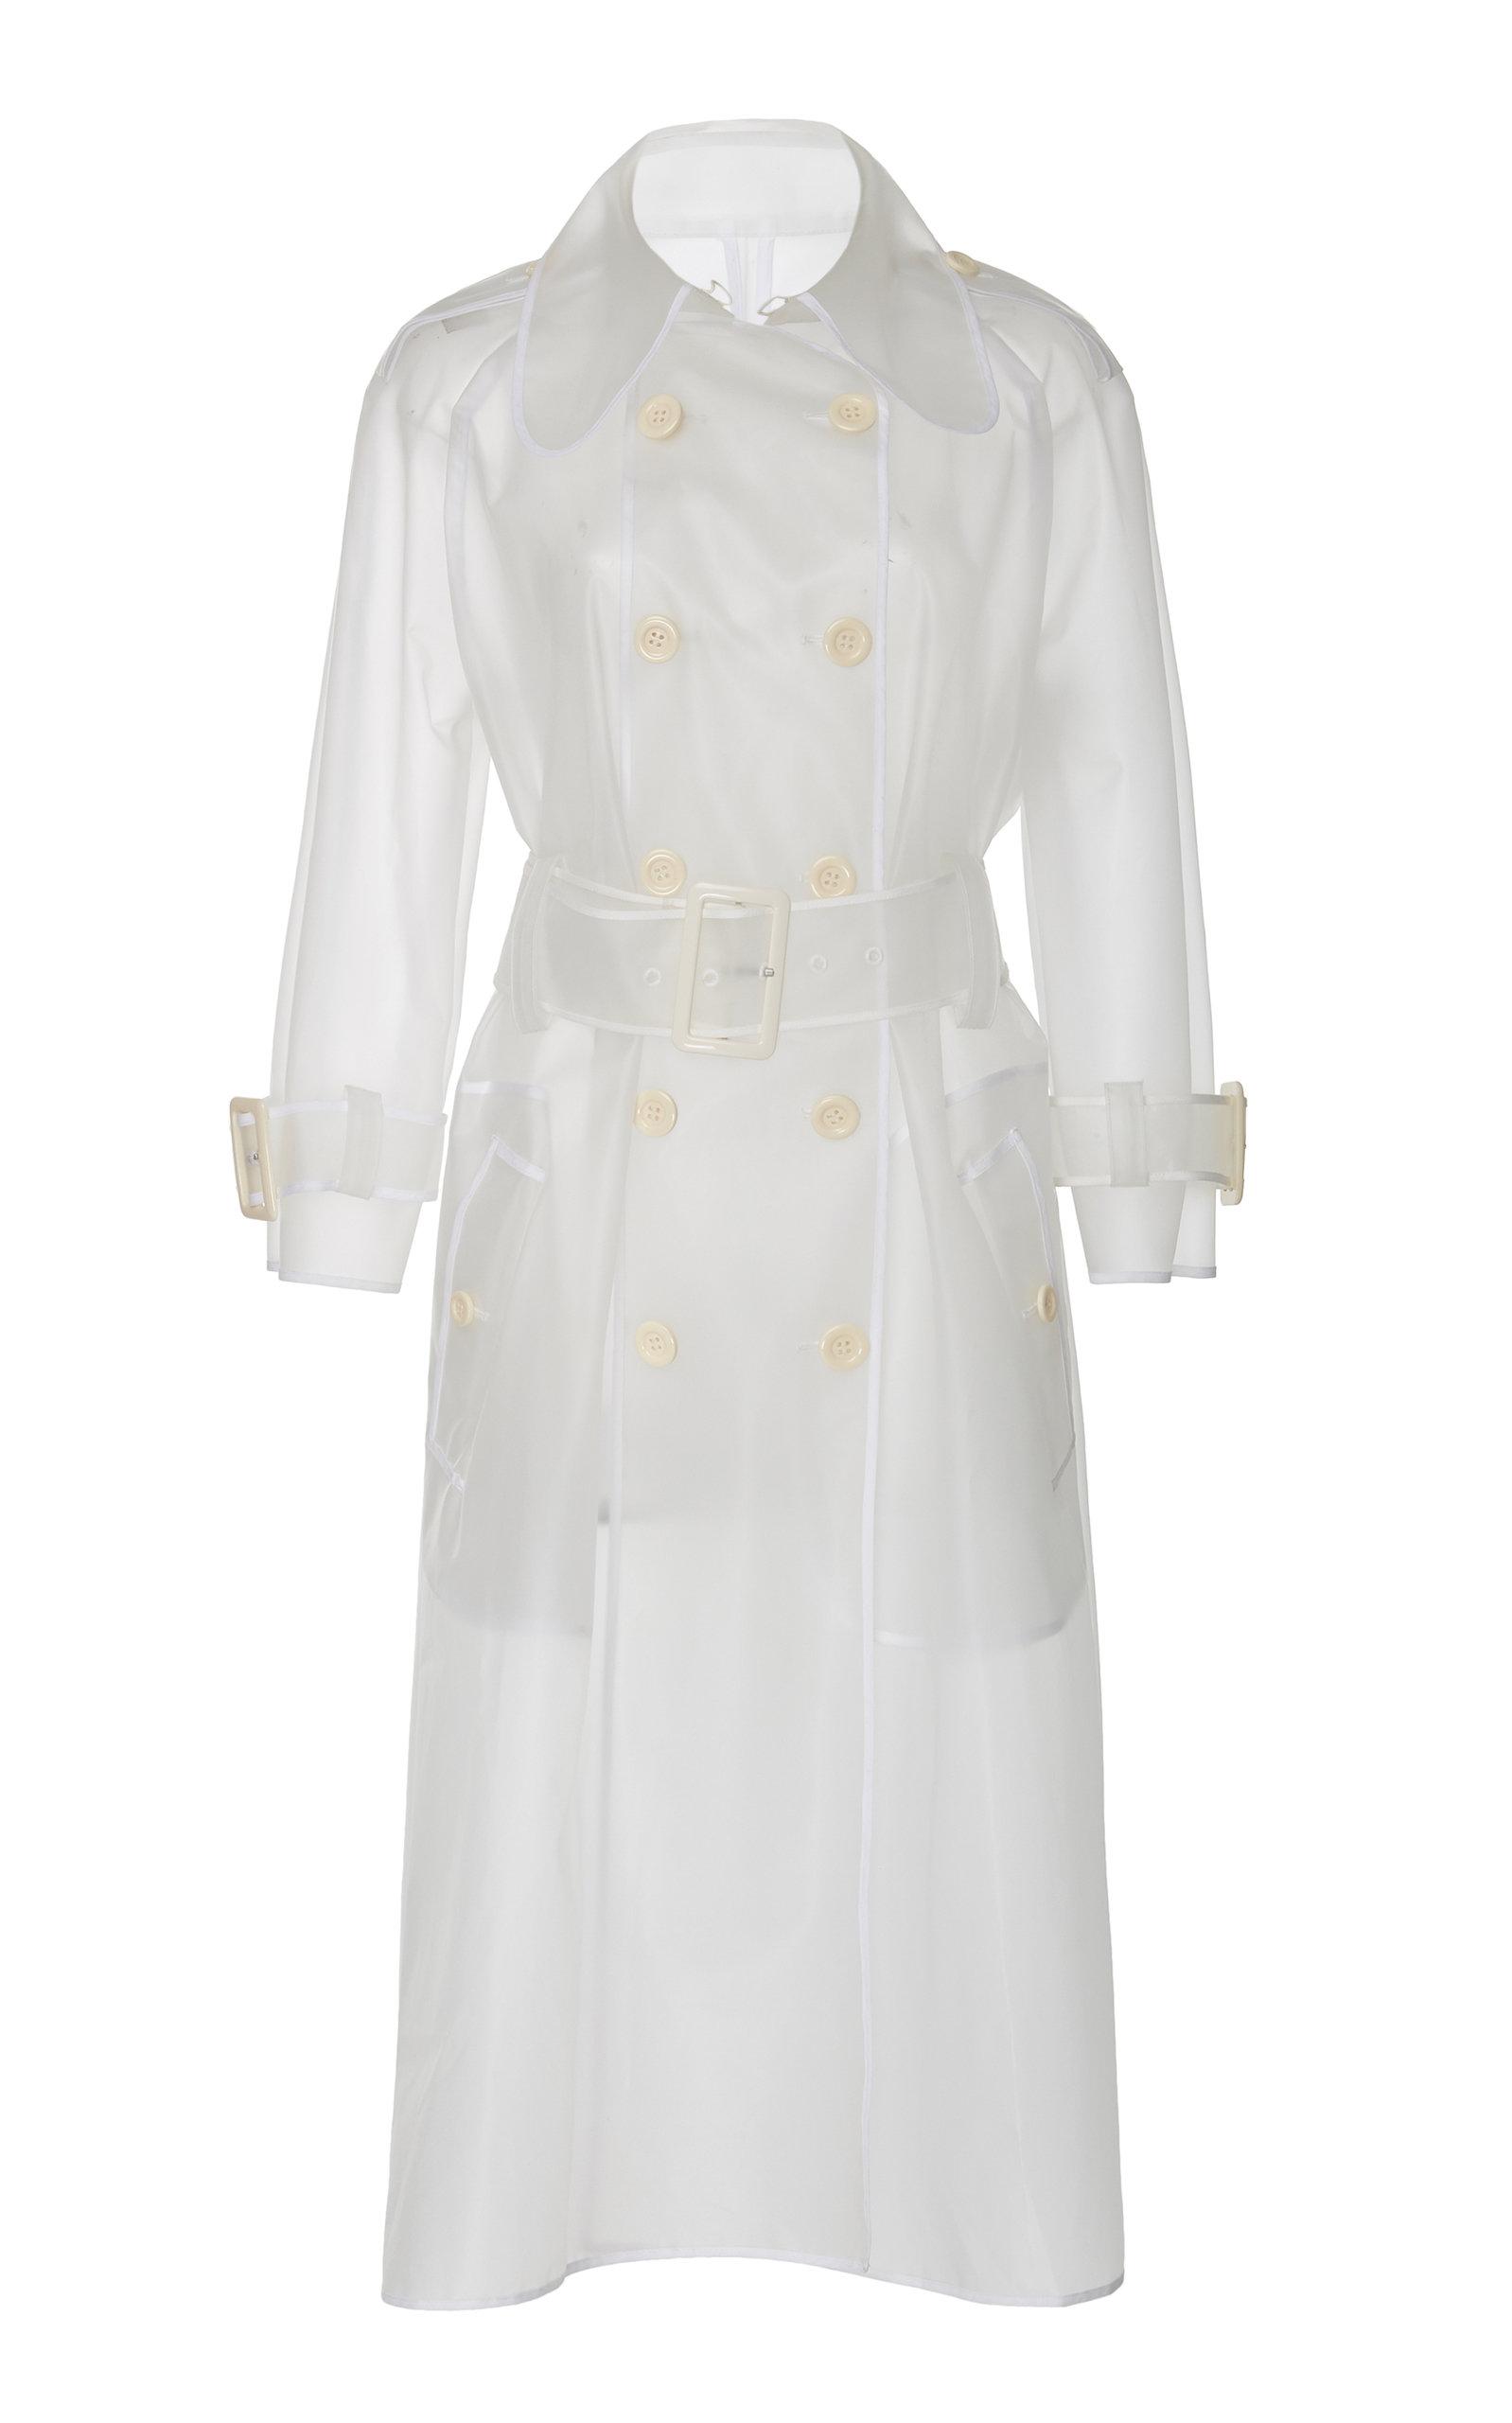 ALEXACHUNG Transparent Trench Coat in White - Lyst